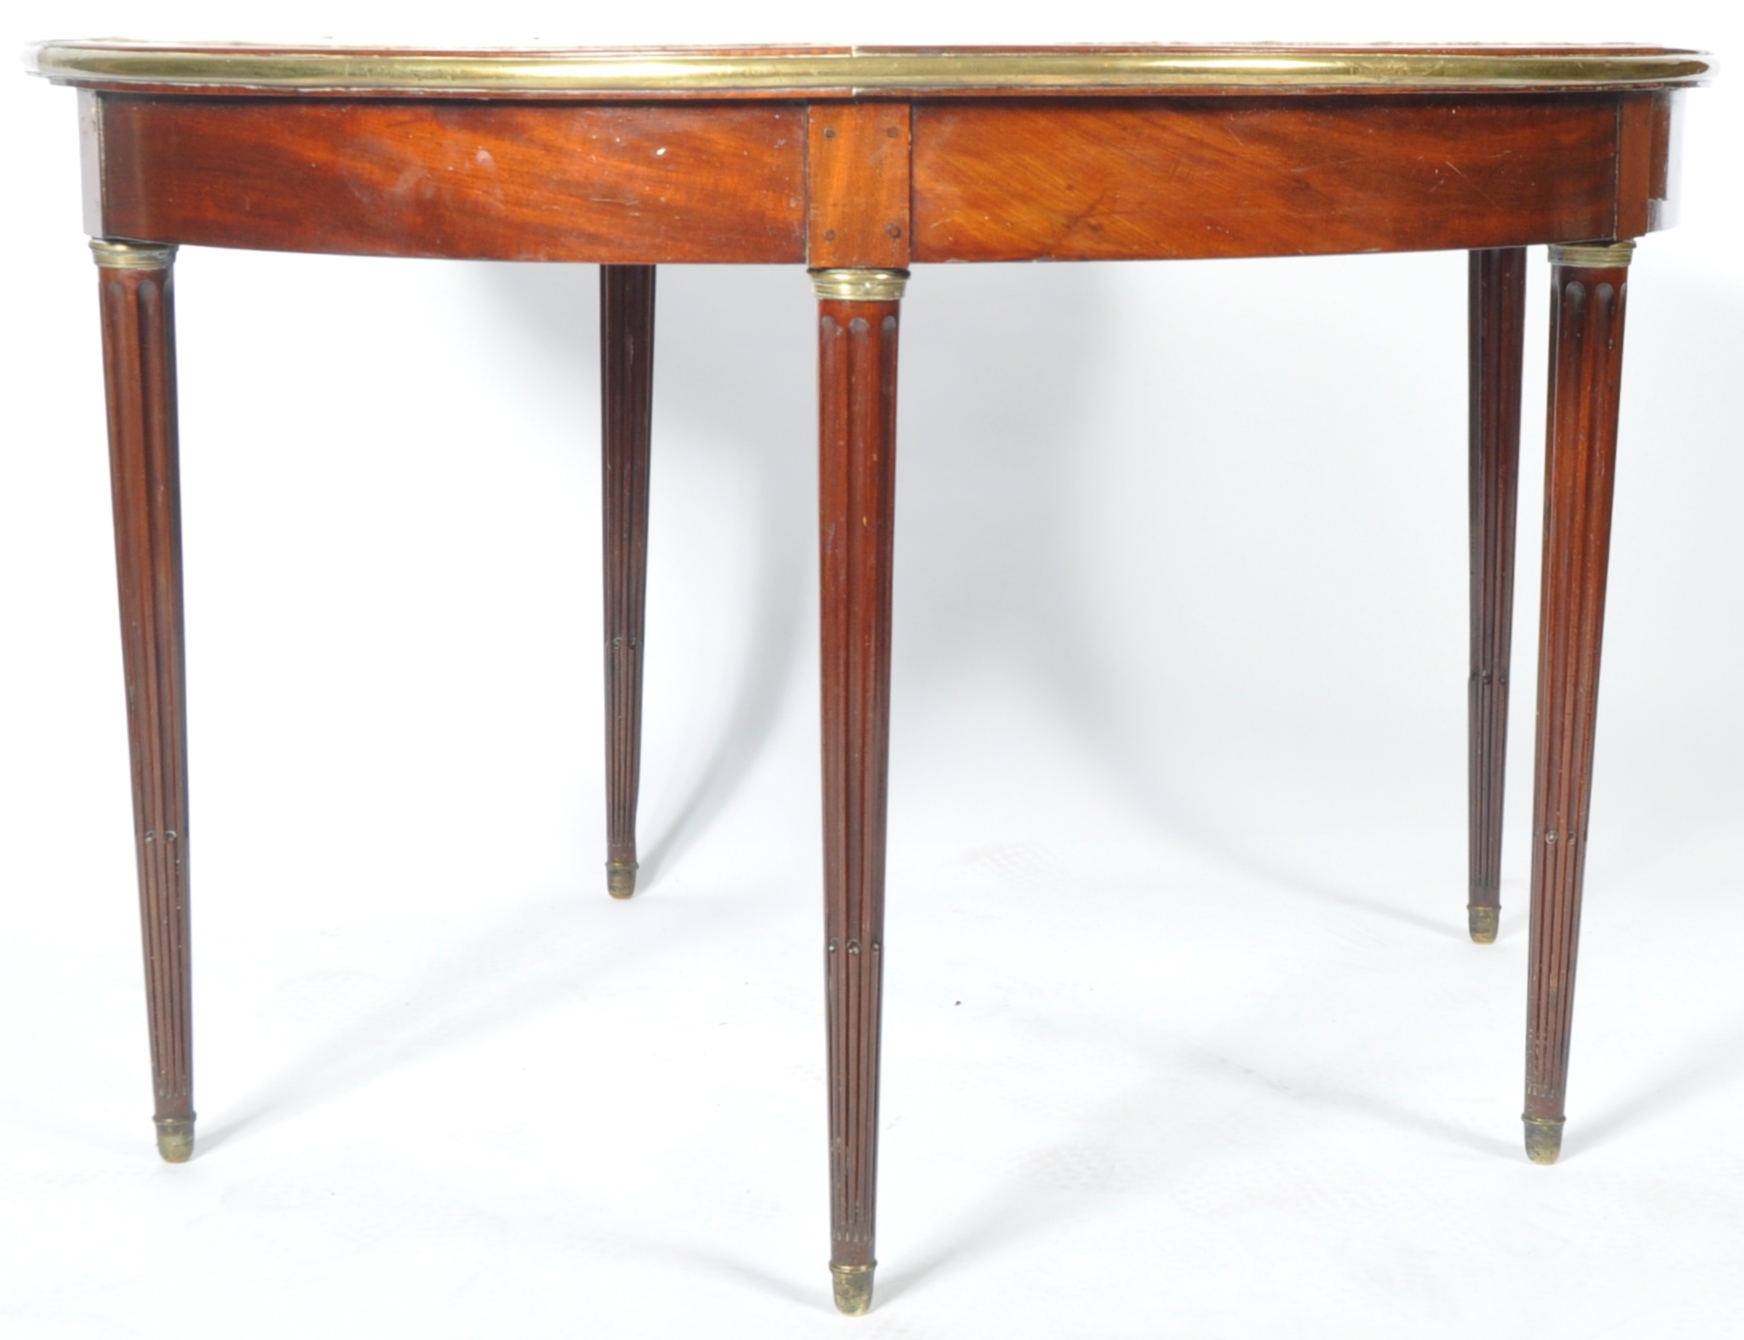 EARLY 20TH CENTURY FRENCH EMPIRE BRASS AND MAHOGANY CARD TABLE - Image 5 of 7